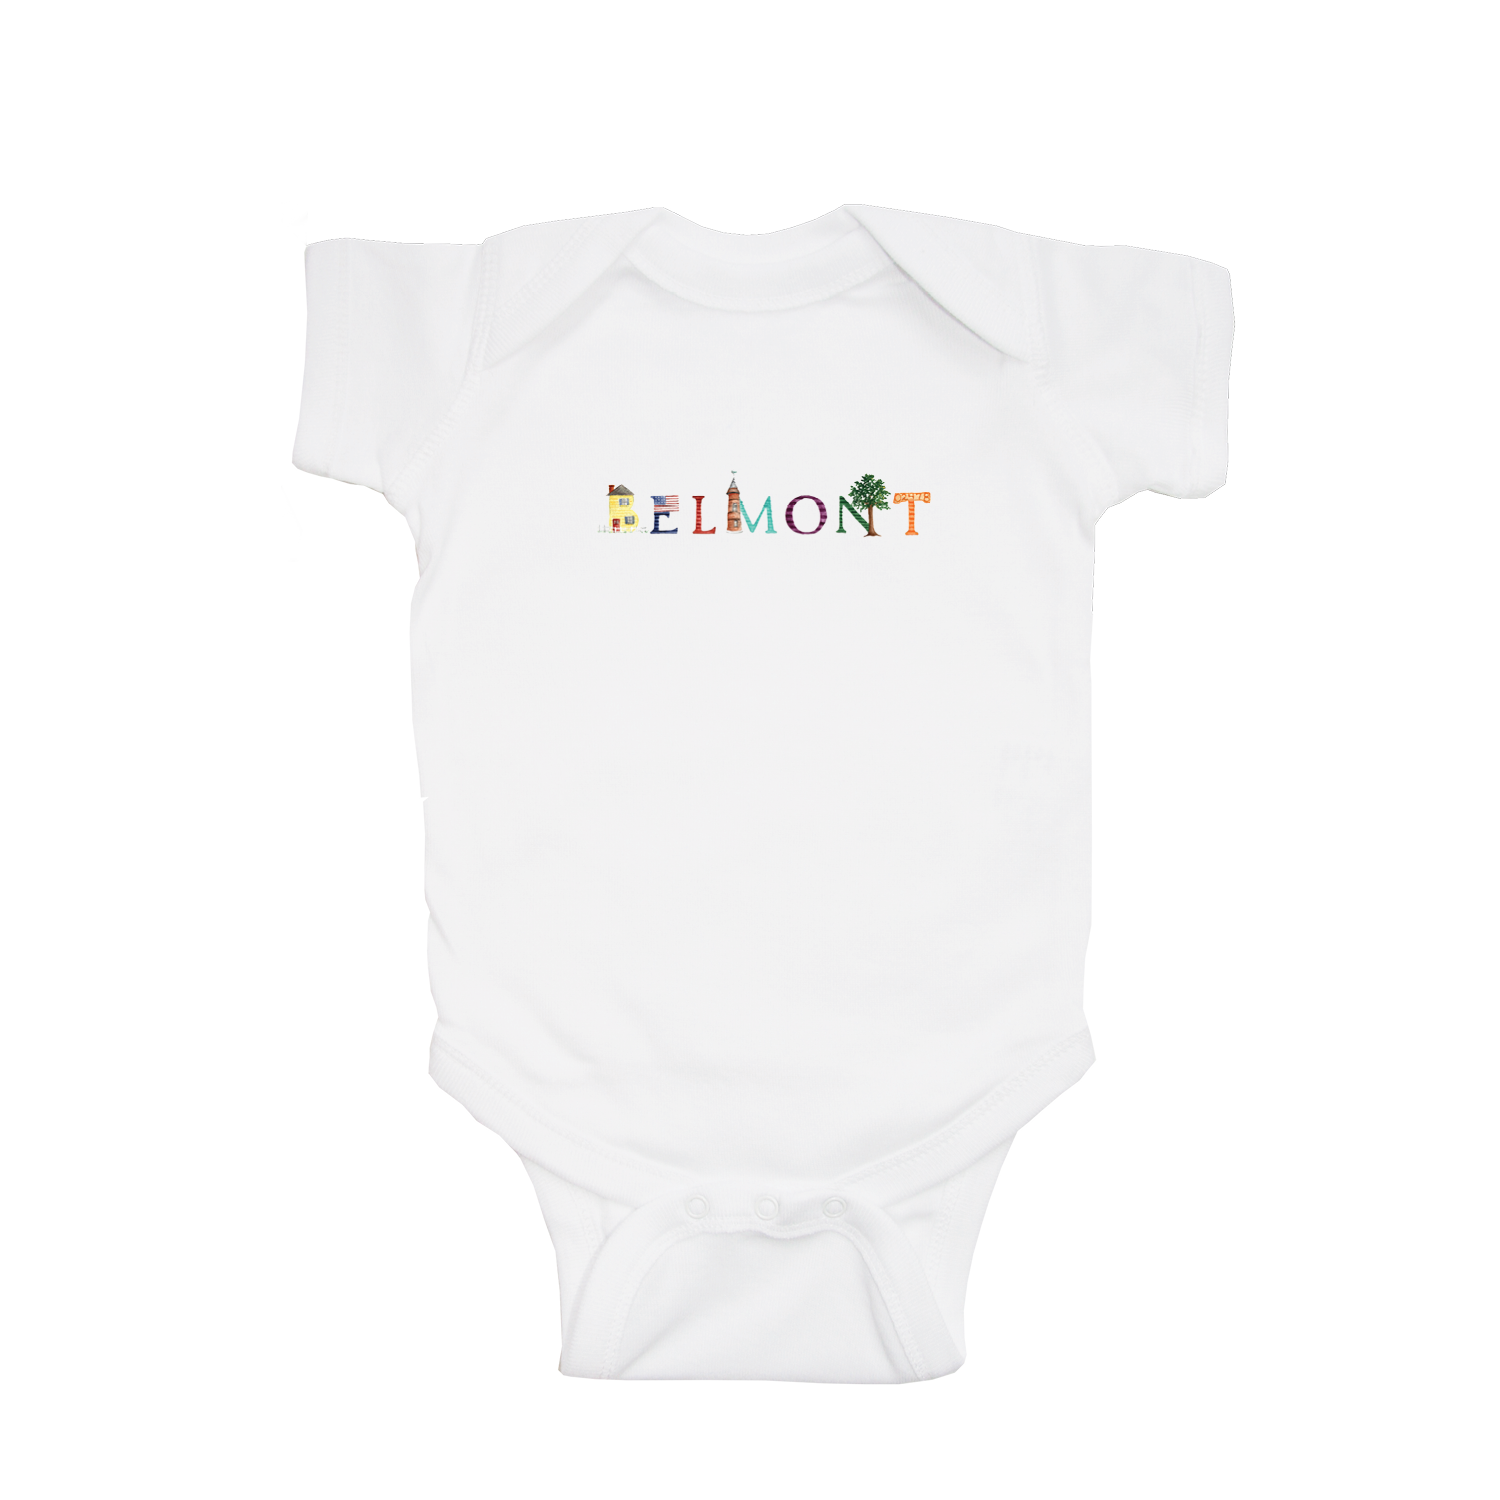 Belmont baby snap up short sleeve